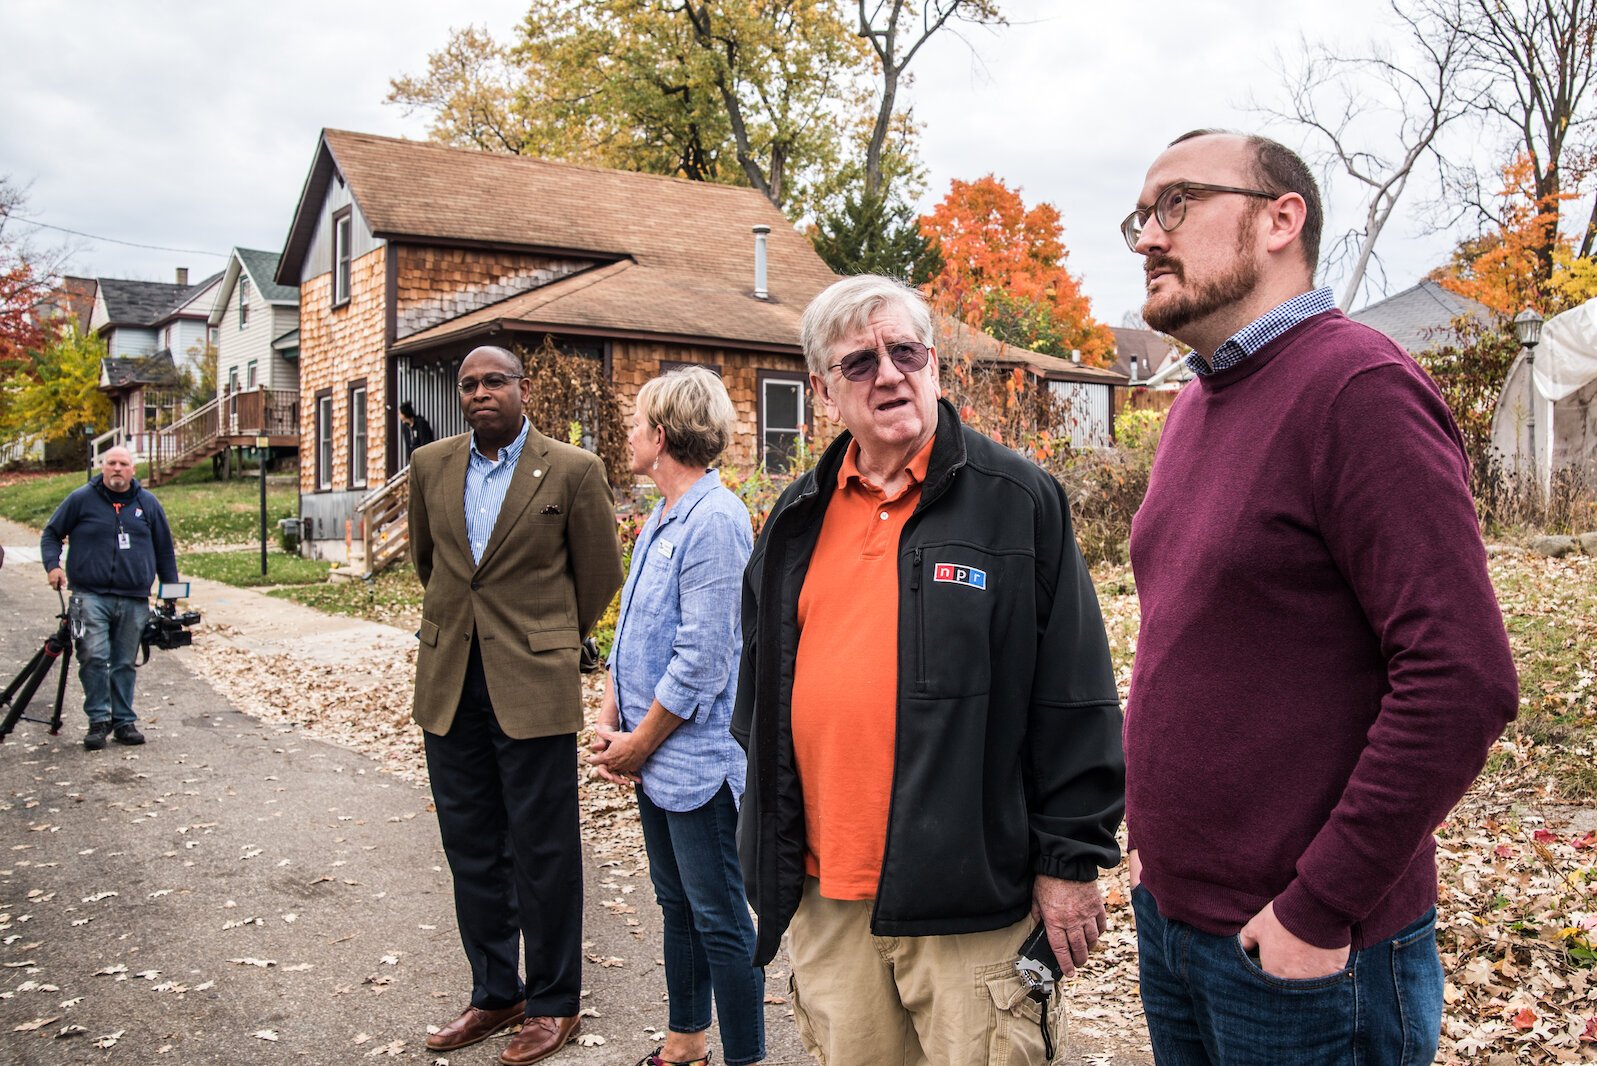 Kalamazoo City Commissioner Chris Praedel, right, talks with the media when officials with the City and development partners hosted an open house on Tuesday, Oct. 25, 2022, at a new housing duplex at 203–205 Wall Street in the Vine Neighborhood.